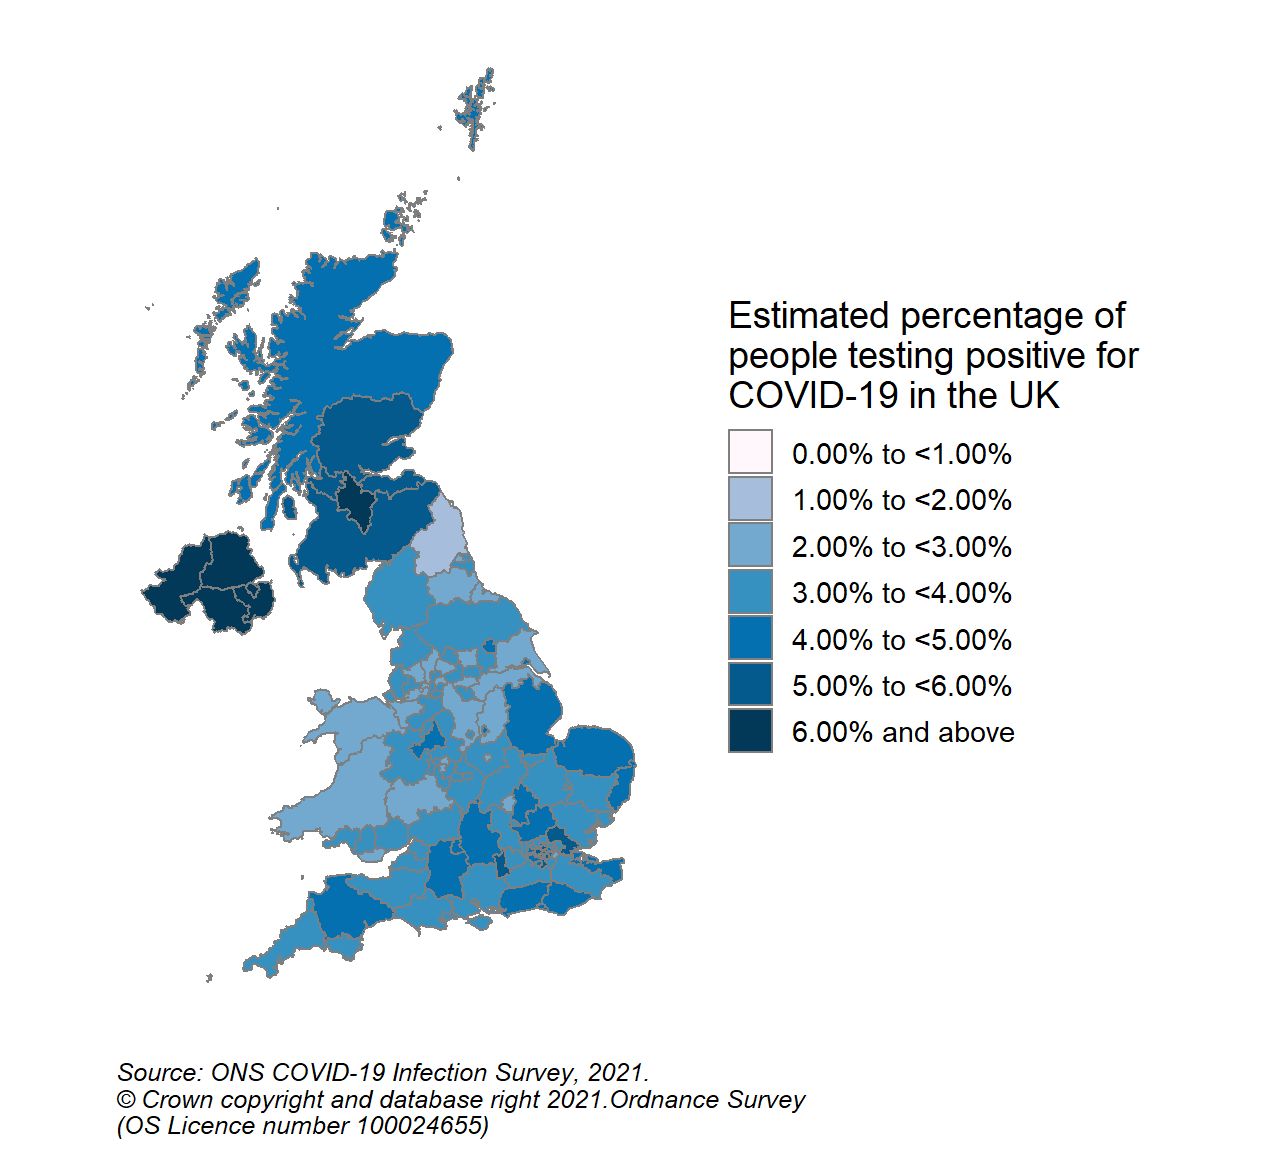 This colour coded map of the UK shows the modelled estimates of the percentage of the private residential population testing positive for COVID-19, by COVID-19 Infection Survey sub-regions. In Scotland, these sub-regions are comprised of Health Boards. The regions are: 123 - NHS Grampian, NHS Highland, NHS Orkney, NHS Shetland and NHS Western Isles, 124 - NHS Fife, NHS Forth Valley and NHS Tayside, 125 - NHS Greater Glasgow & Clyde, 126 - NHS Lothian, 127 - NHS Lanarkshire, 128 - NHS Ayrshire & Arran, NHS Borders and NHS Dumfries & Galloway.  The sub-region with the highest modelled estimate for the percentage of people testing positive was CIS Region 127 (NHS Lanarkshire) at 6.31% (95% credible interval: 5.18% to 7.69%).  The sub-region with the lowest modelled estimate was Region 123 (NHS Grampian, NHS Highland, NHS Orkney, NHS Shetland and NHS Western Isles), at 4.93% (95% credible interval: 3.97% to 6.11%).